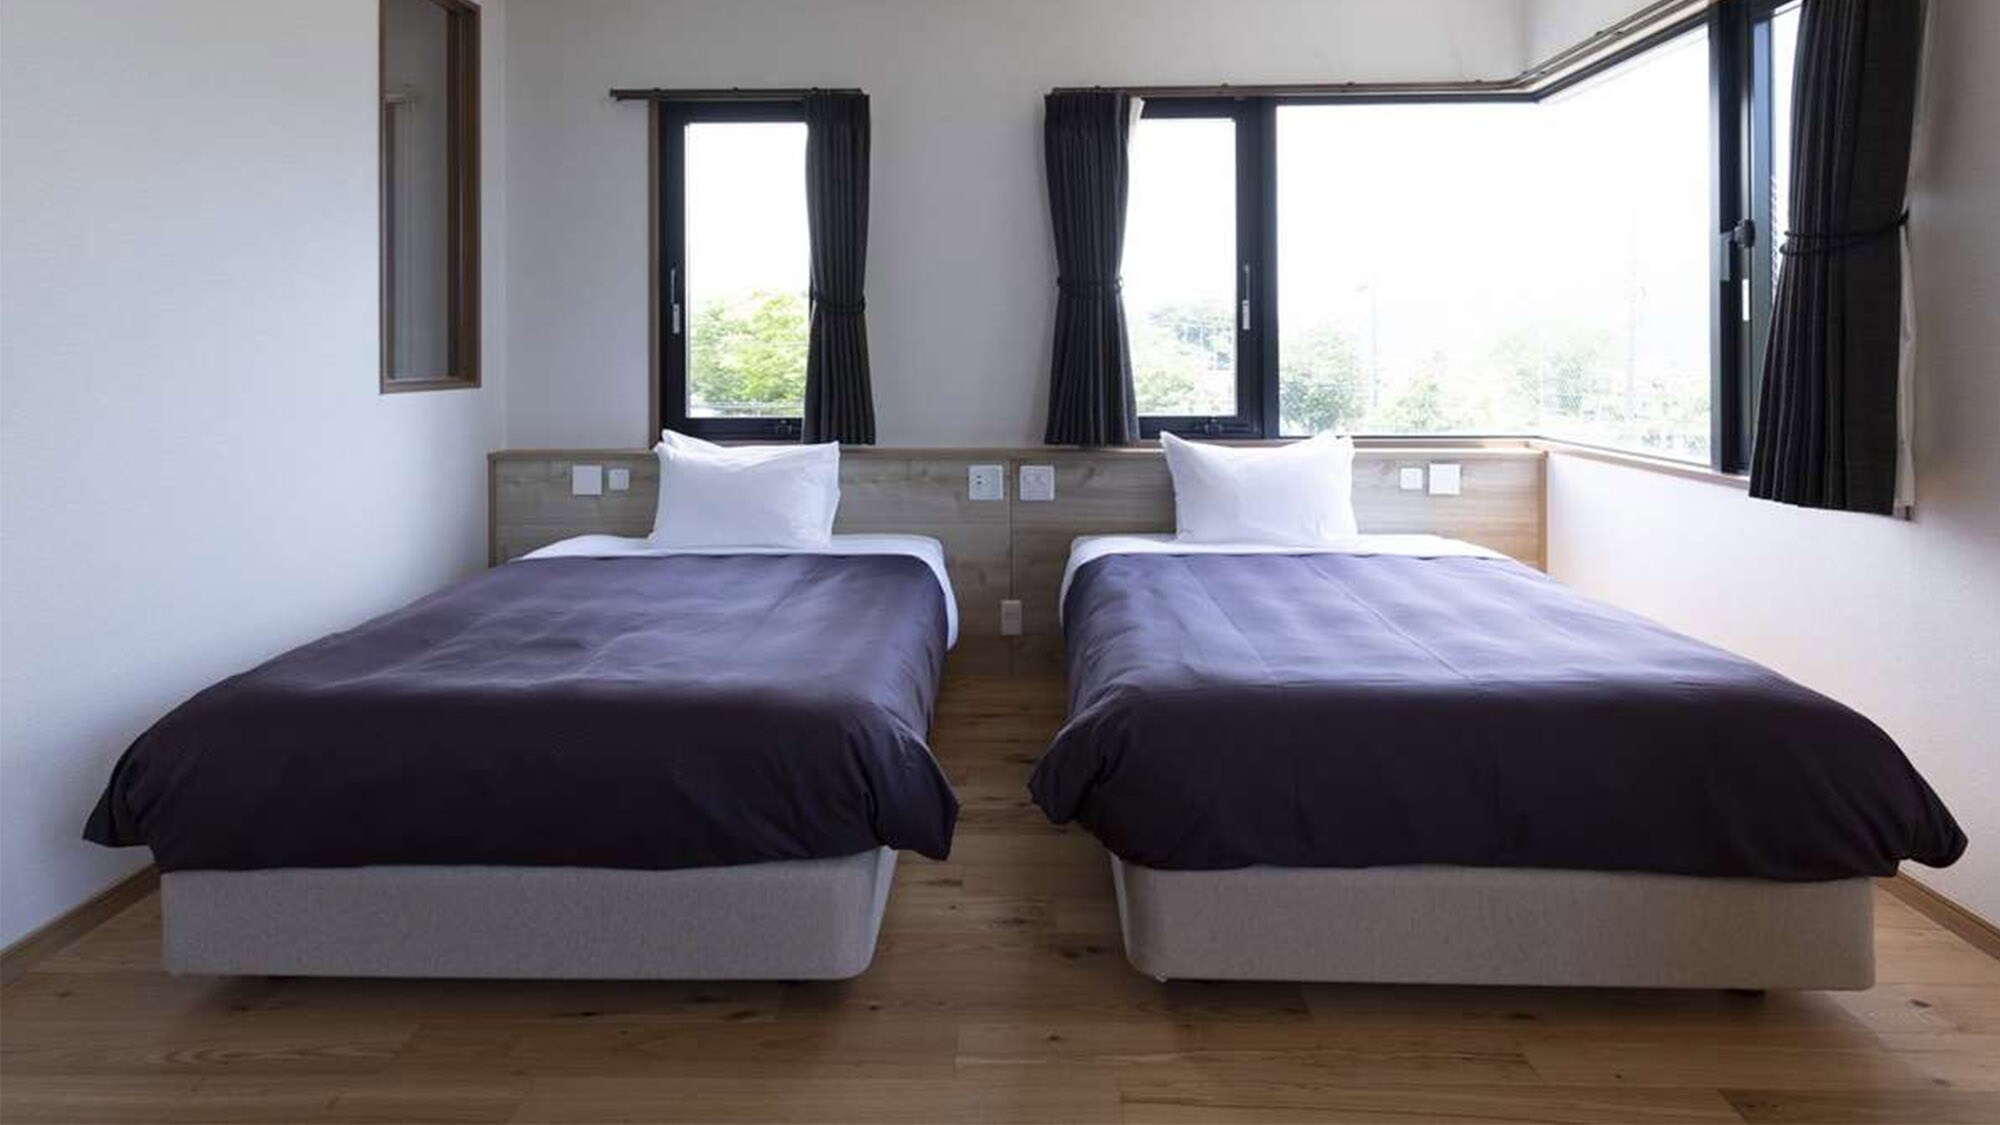 The twin rooms have two semi-double beds. A relaxing space with your loved ones.